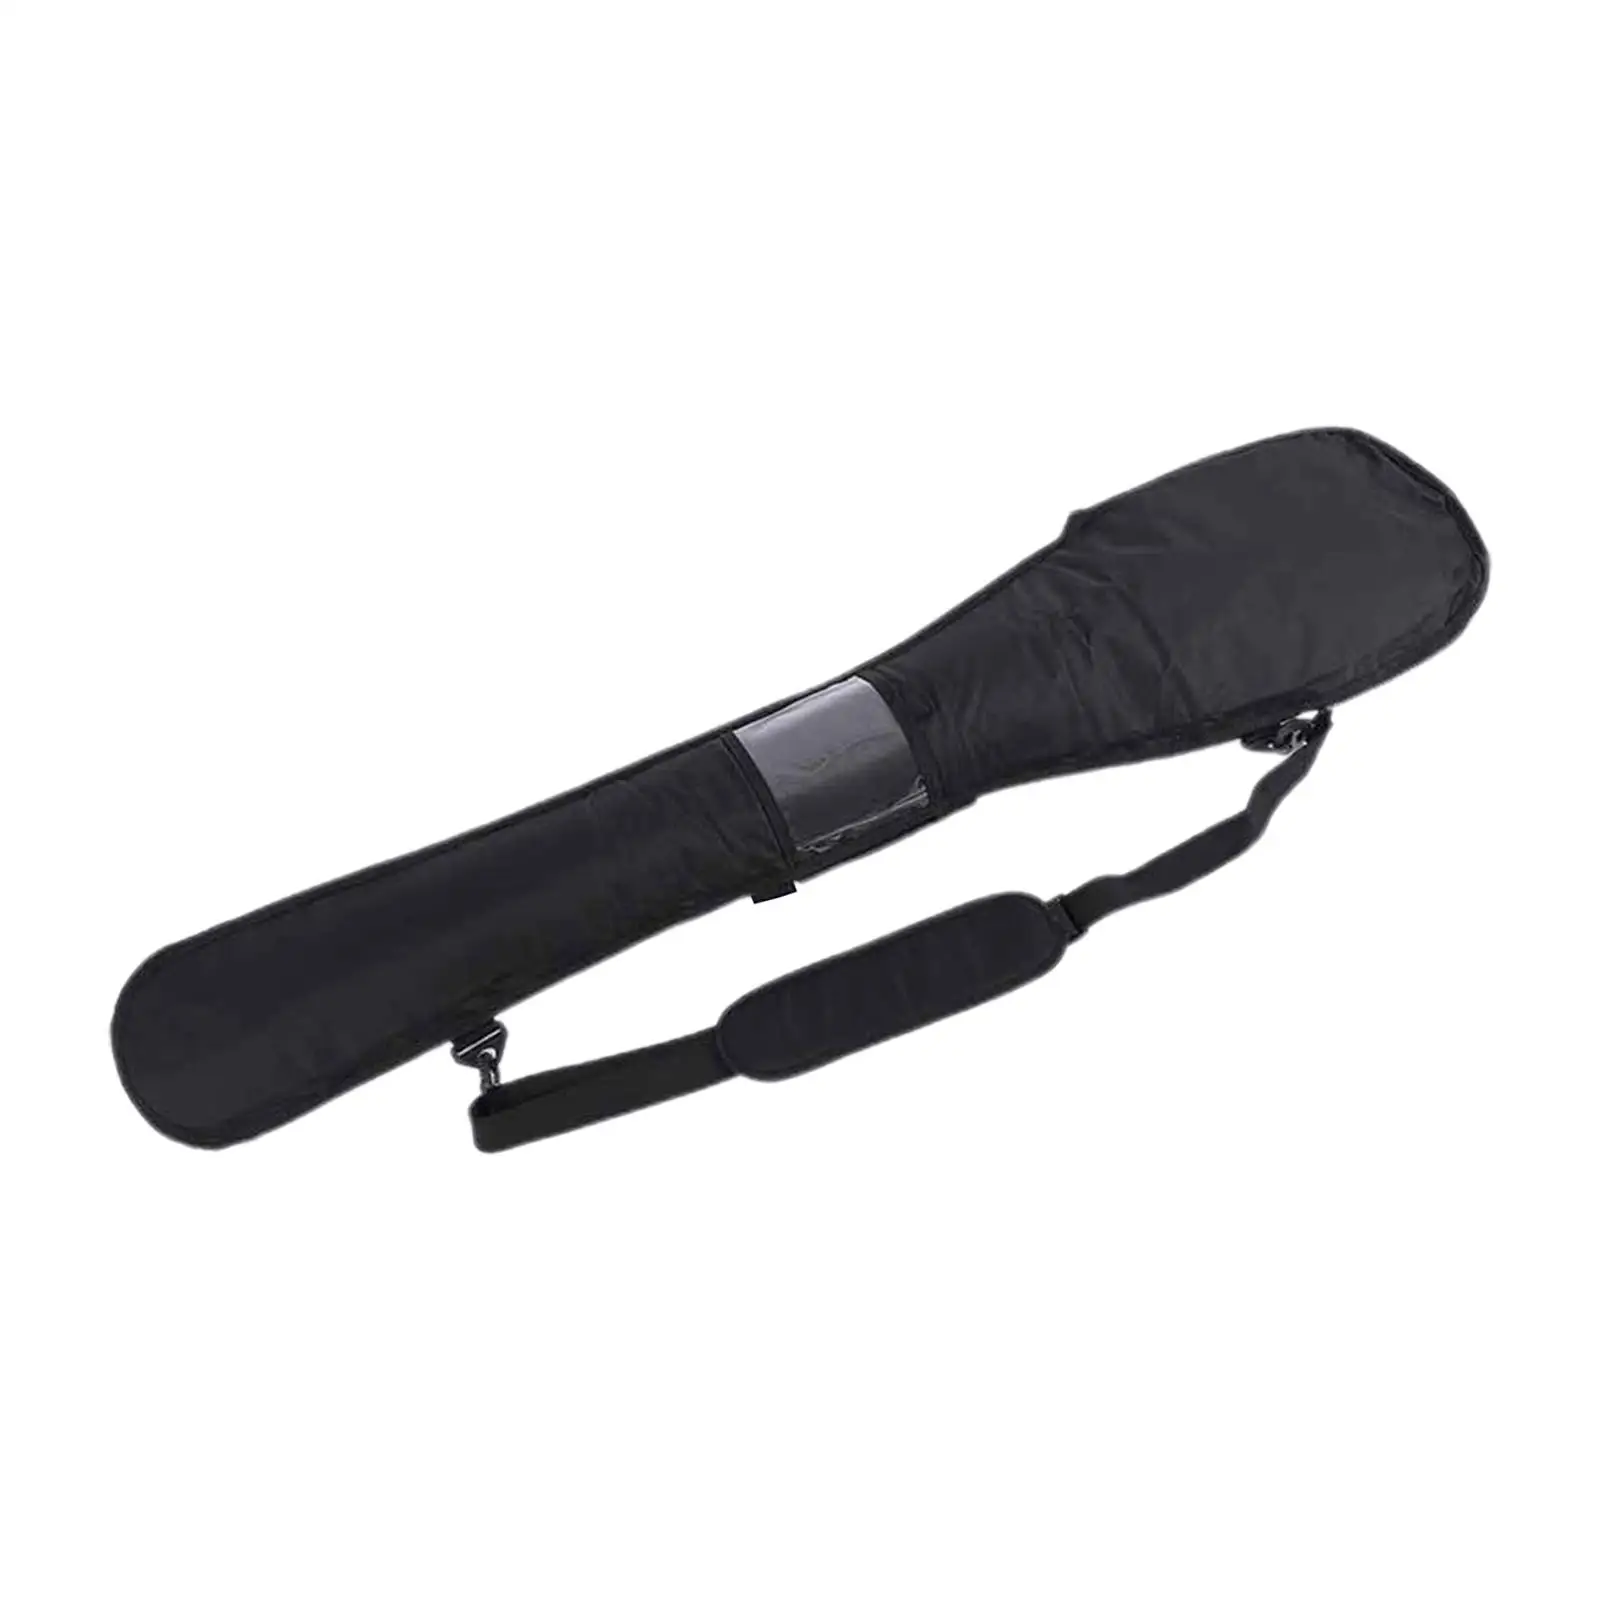 Portable Paddle Pouch Storage Protective Pocket with Adjustable Strap for Canoe Surfboard